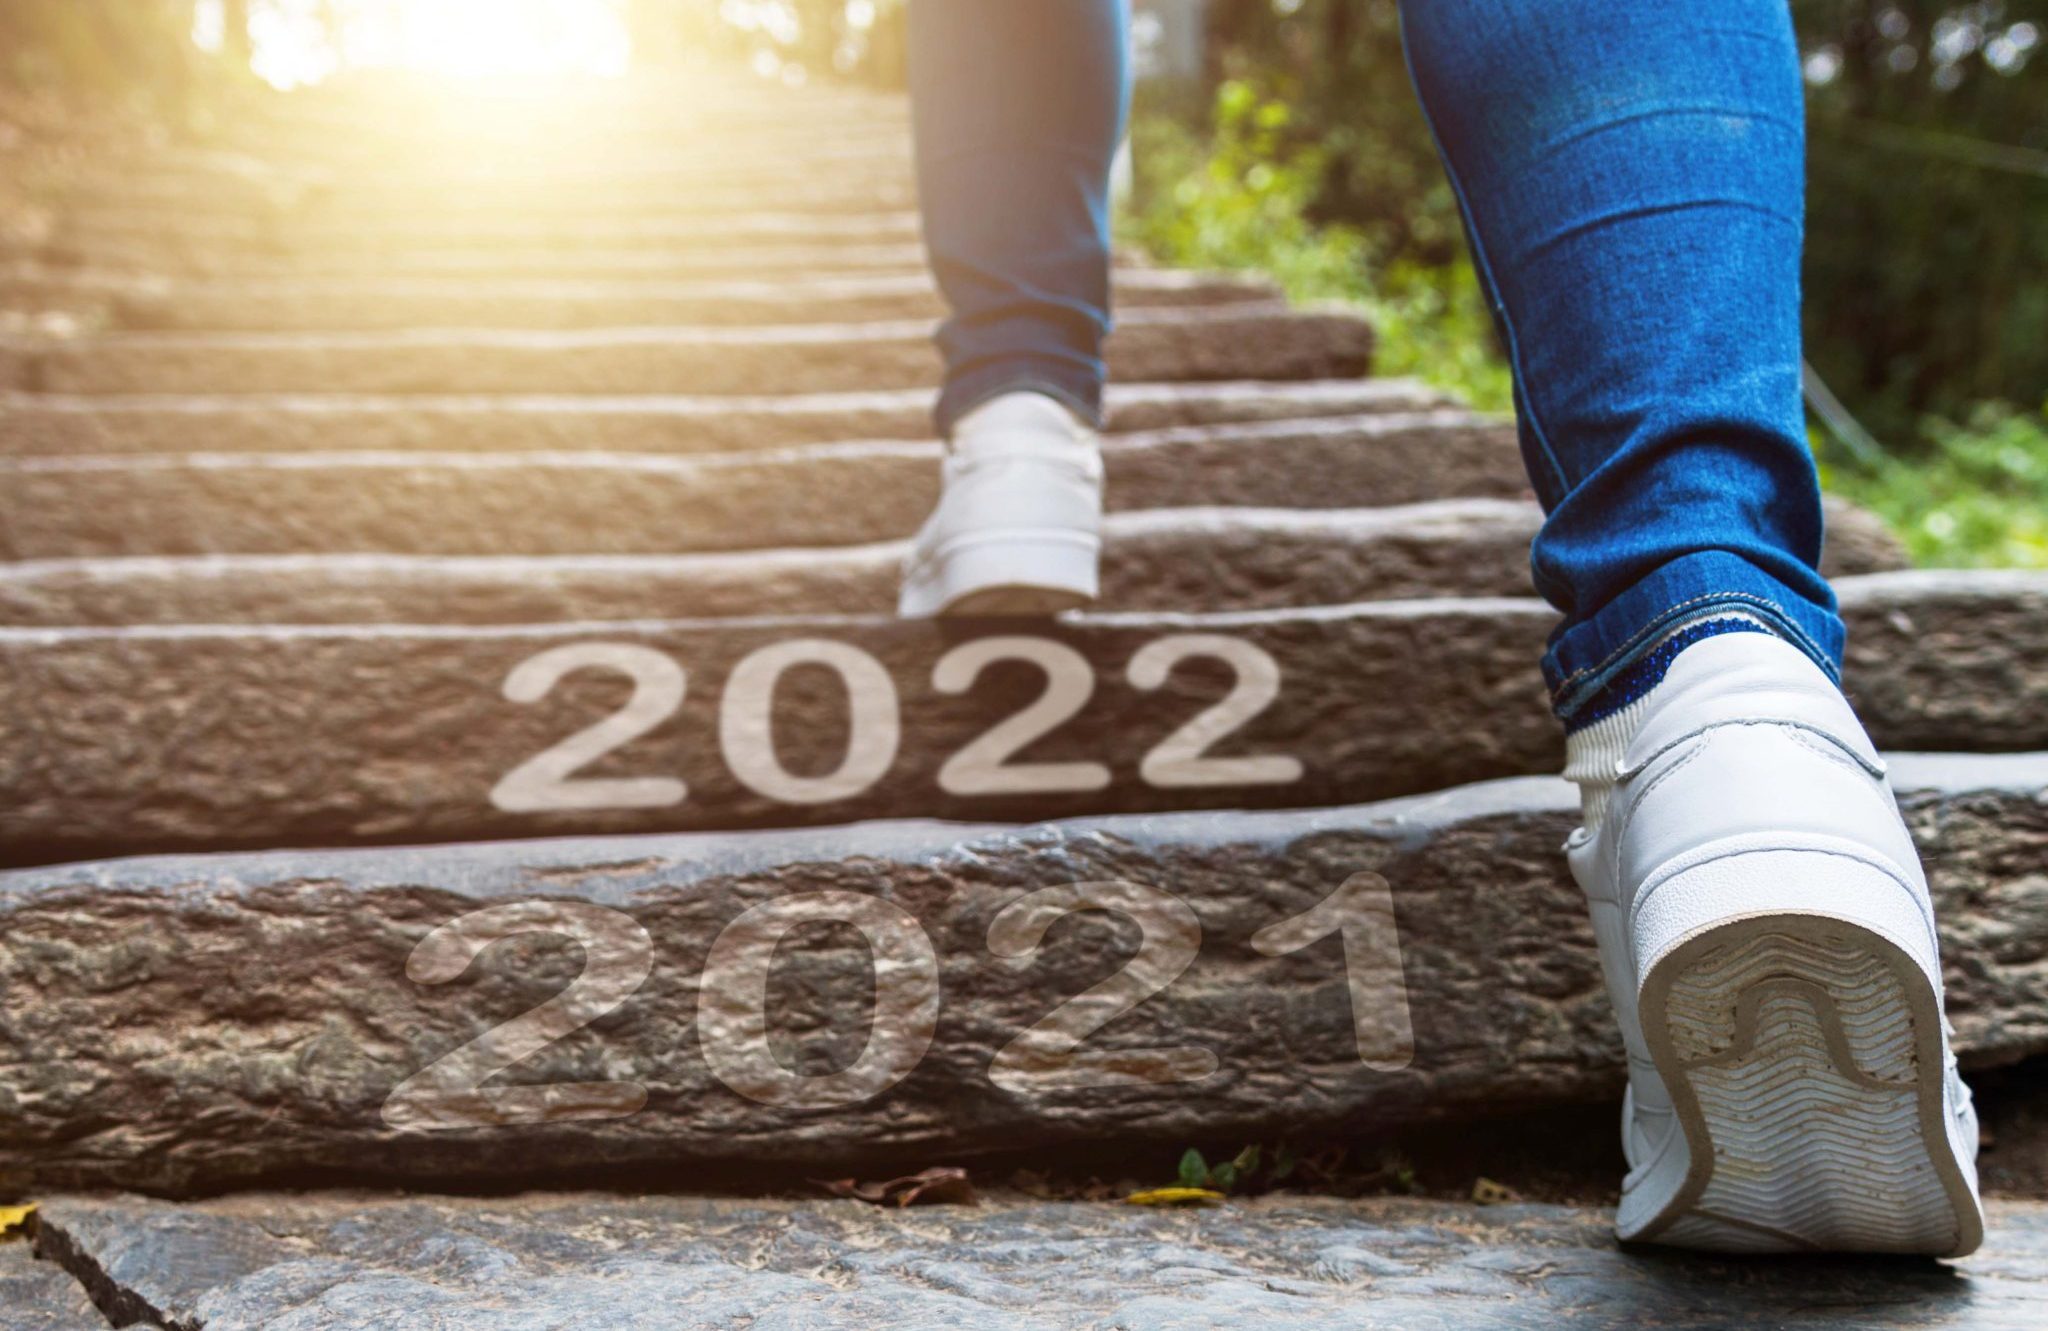 Woman legs walking up stone stairs with number 2022 and 2021